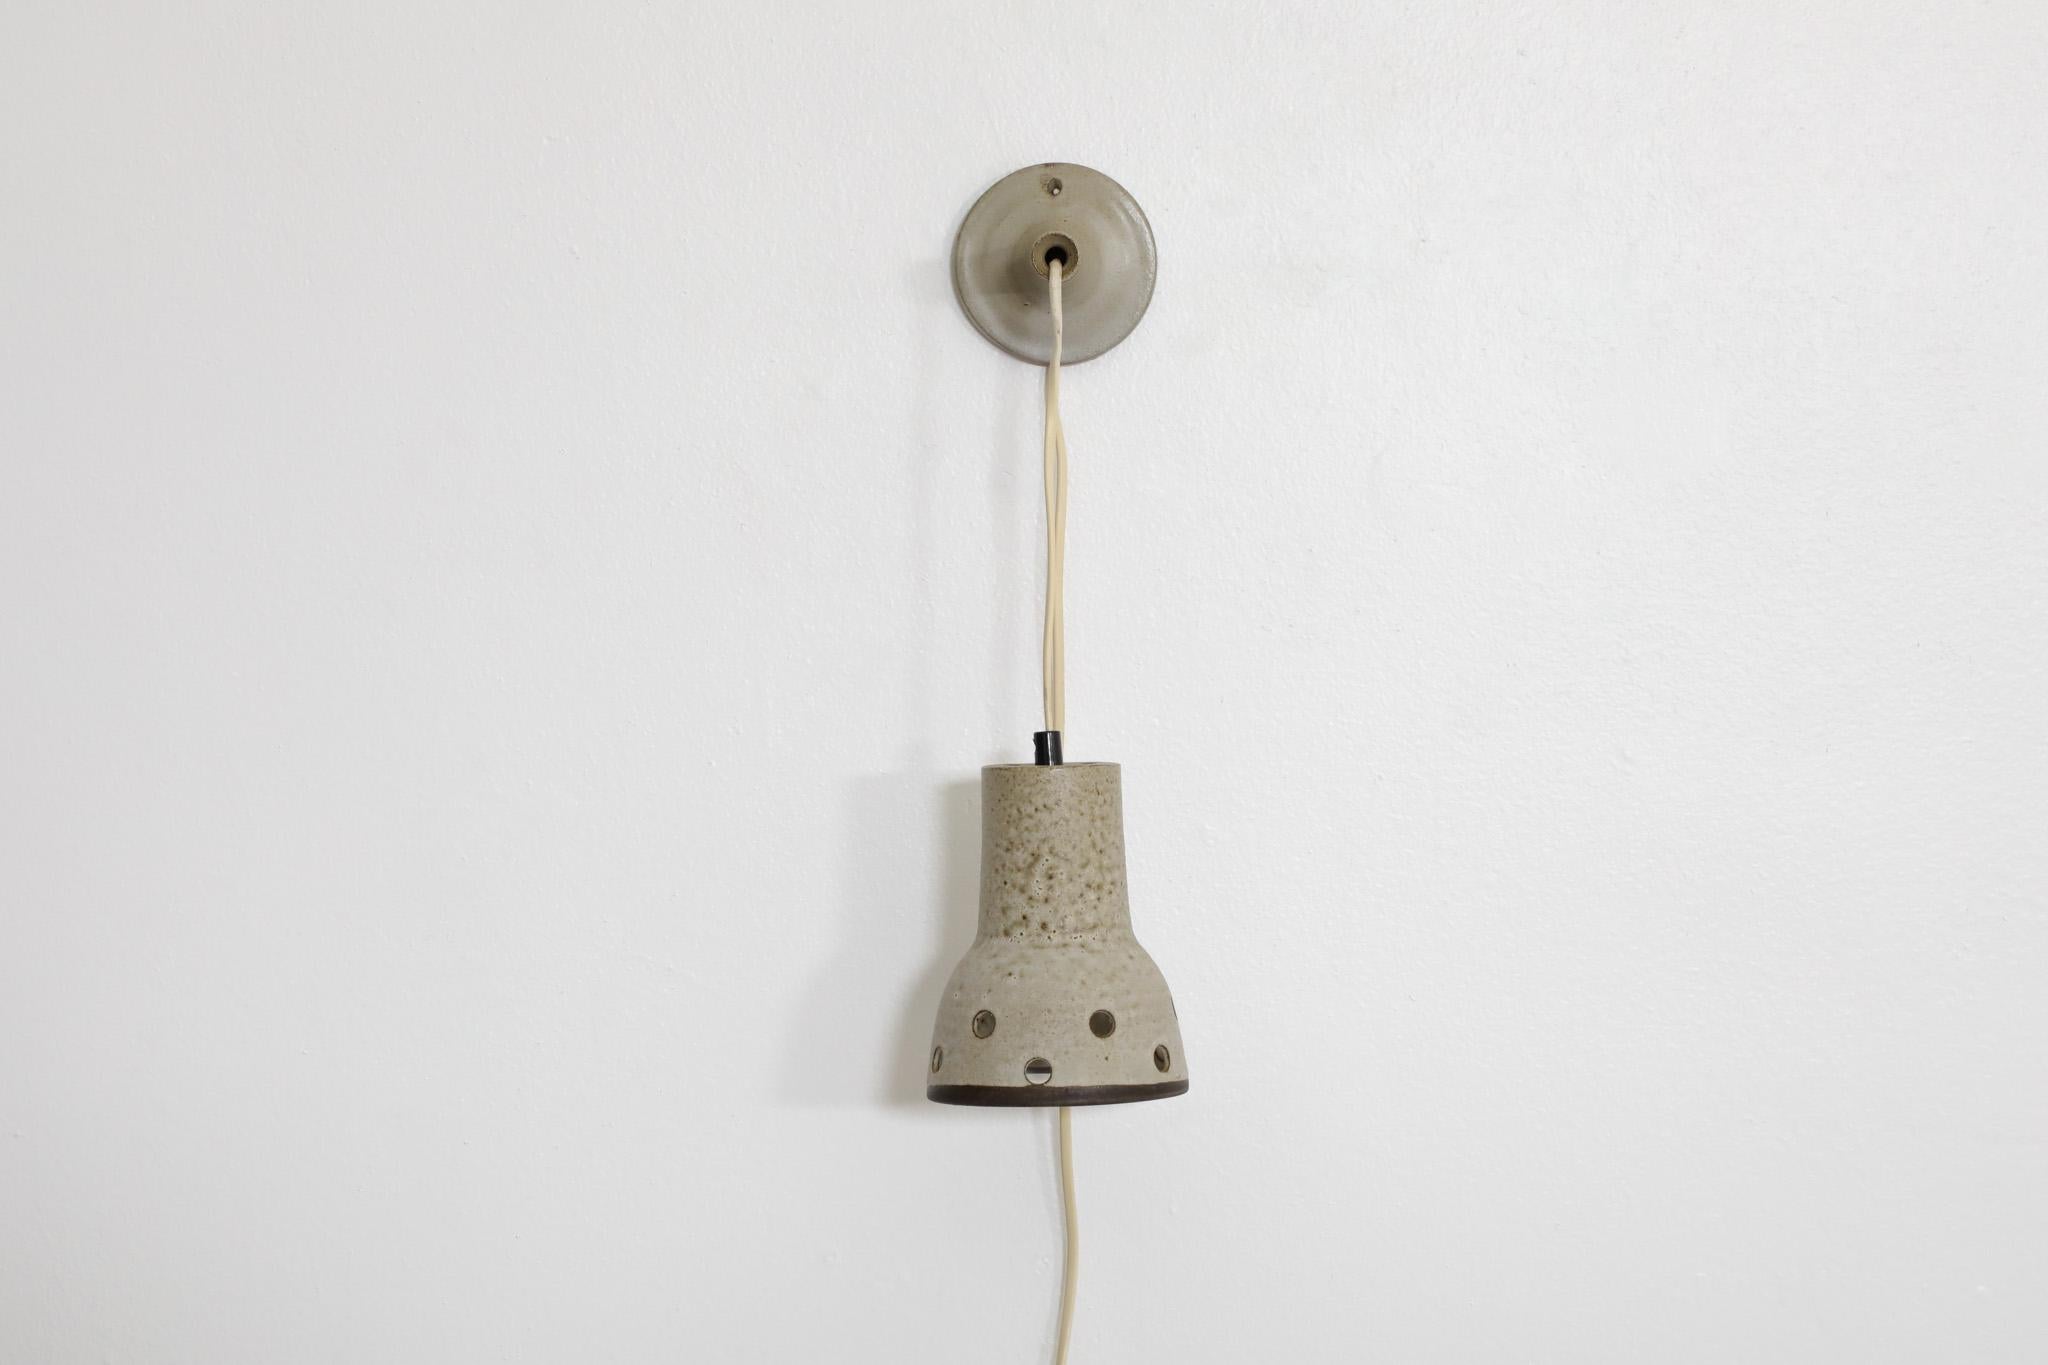 Mid-Century, 1960's, ceramic wall sconce/pendant with dove gray glaze and circle cut-outs. Designed by renowned Dutch ceramicist Hannie Mein. Cute wall lamp, perfect for providing gentle lighting. In original condition with wear consistent with its